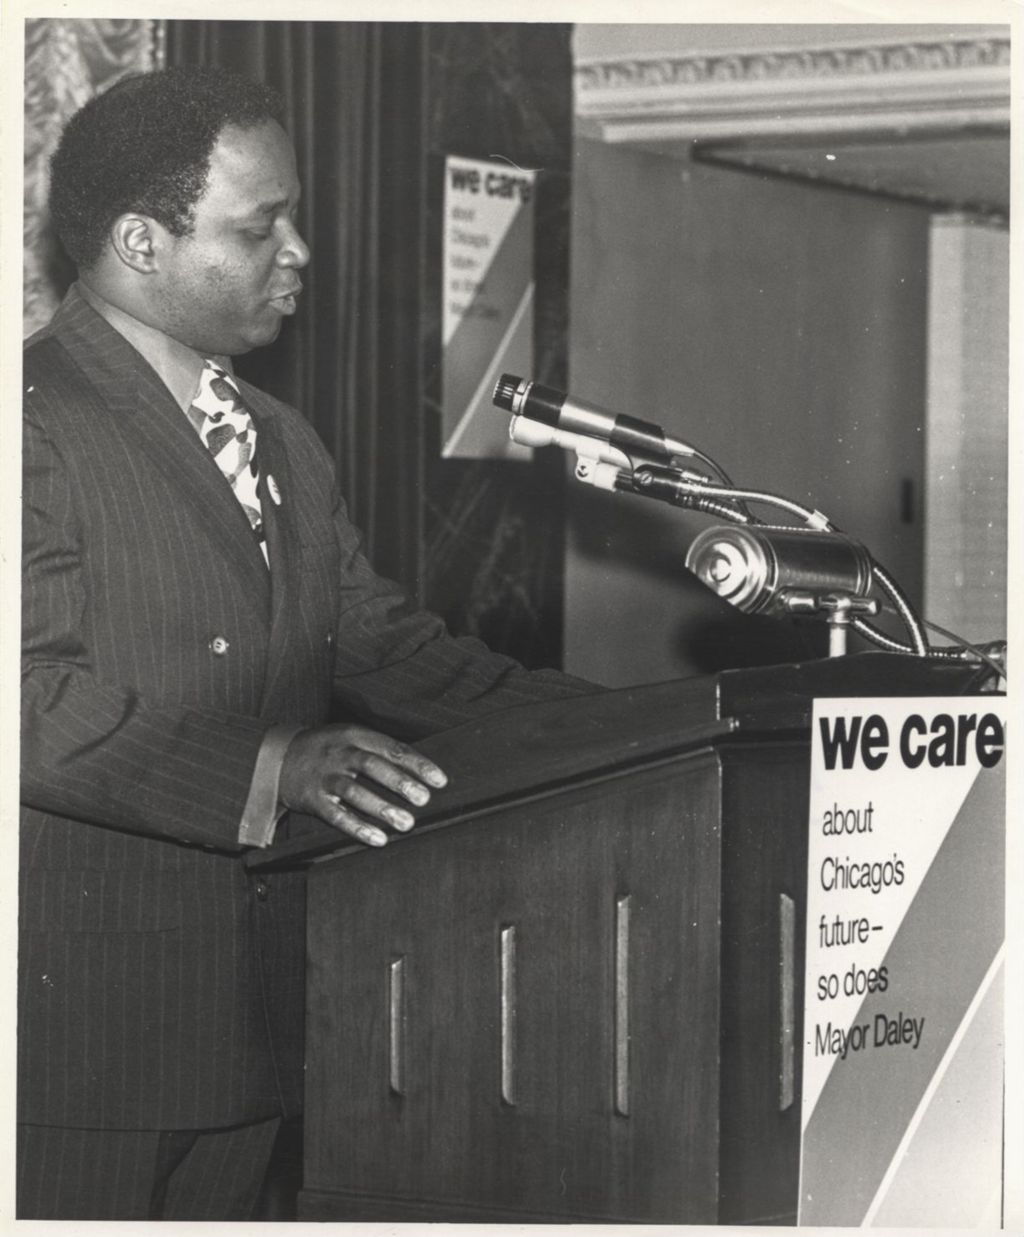 Miniature of Man speaking at a "We Care" campaign event